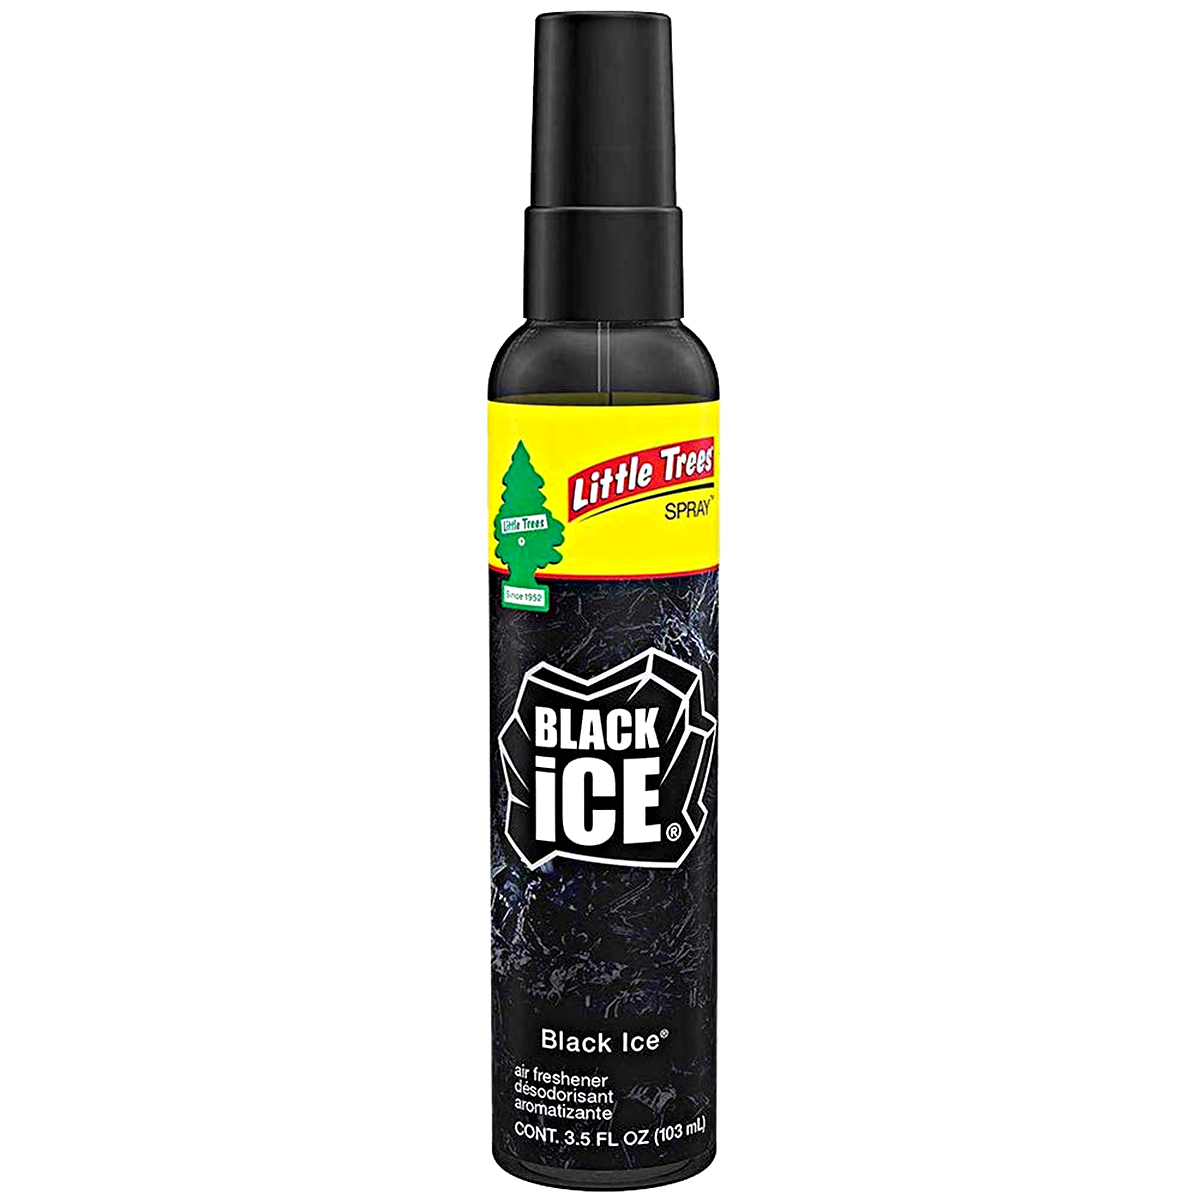 What Scent Is Black Ice Air Freshener